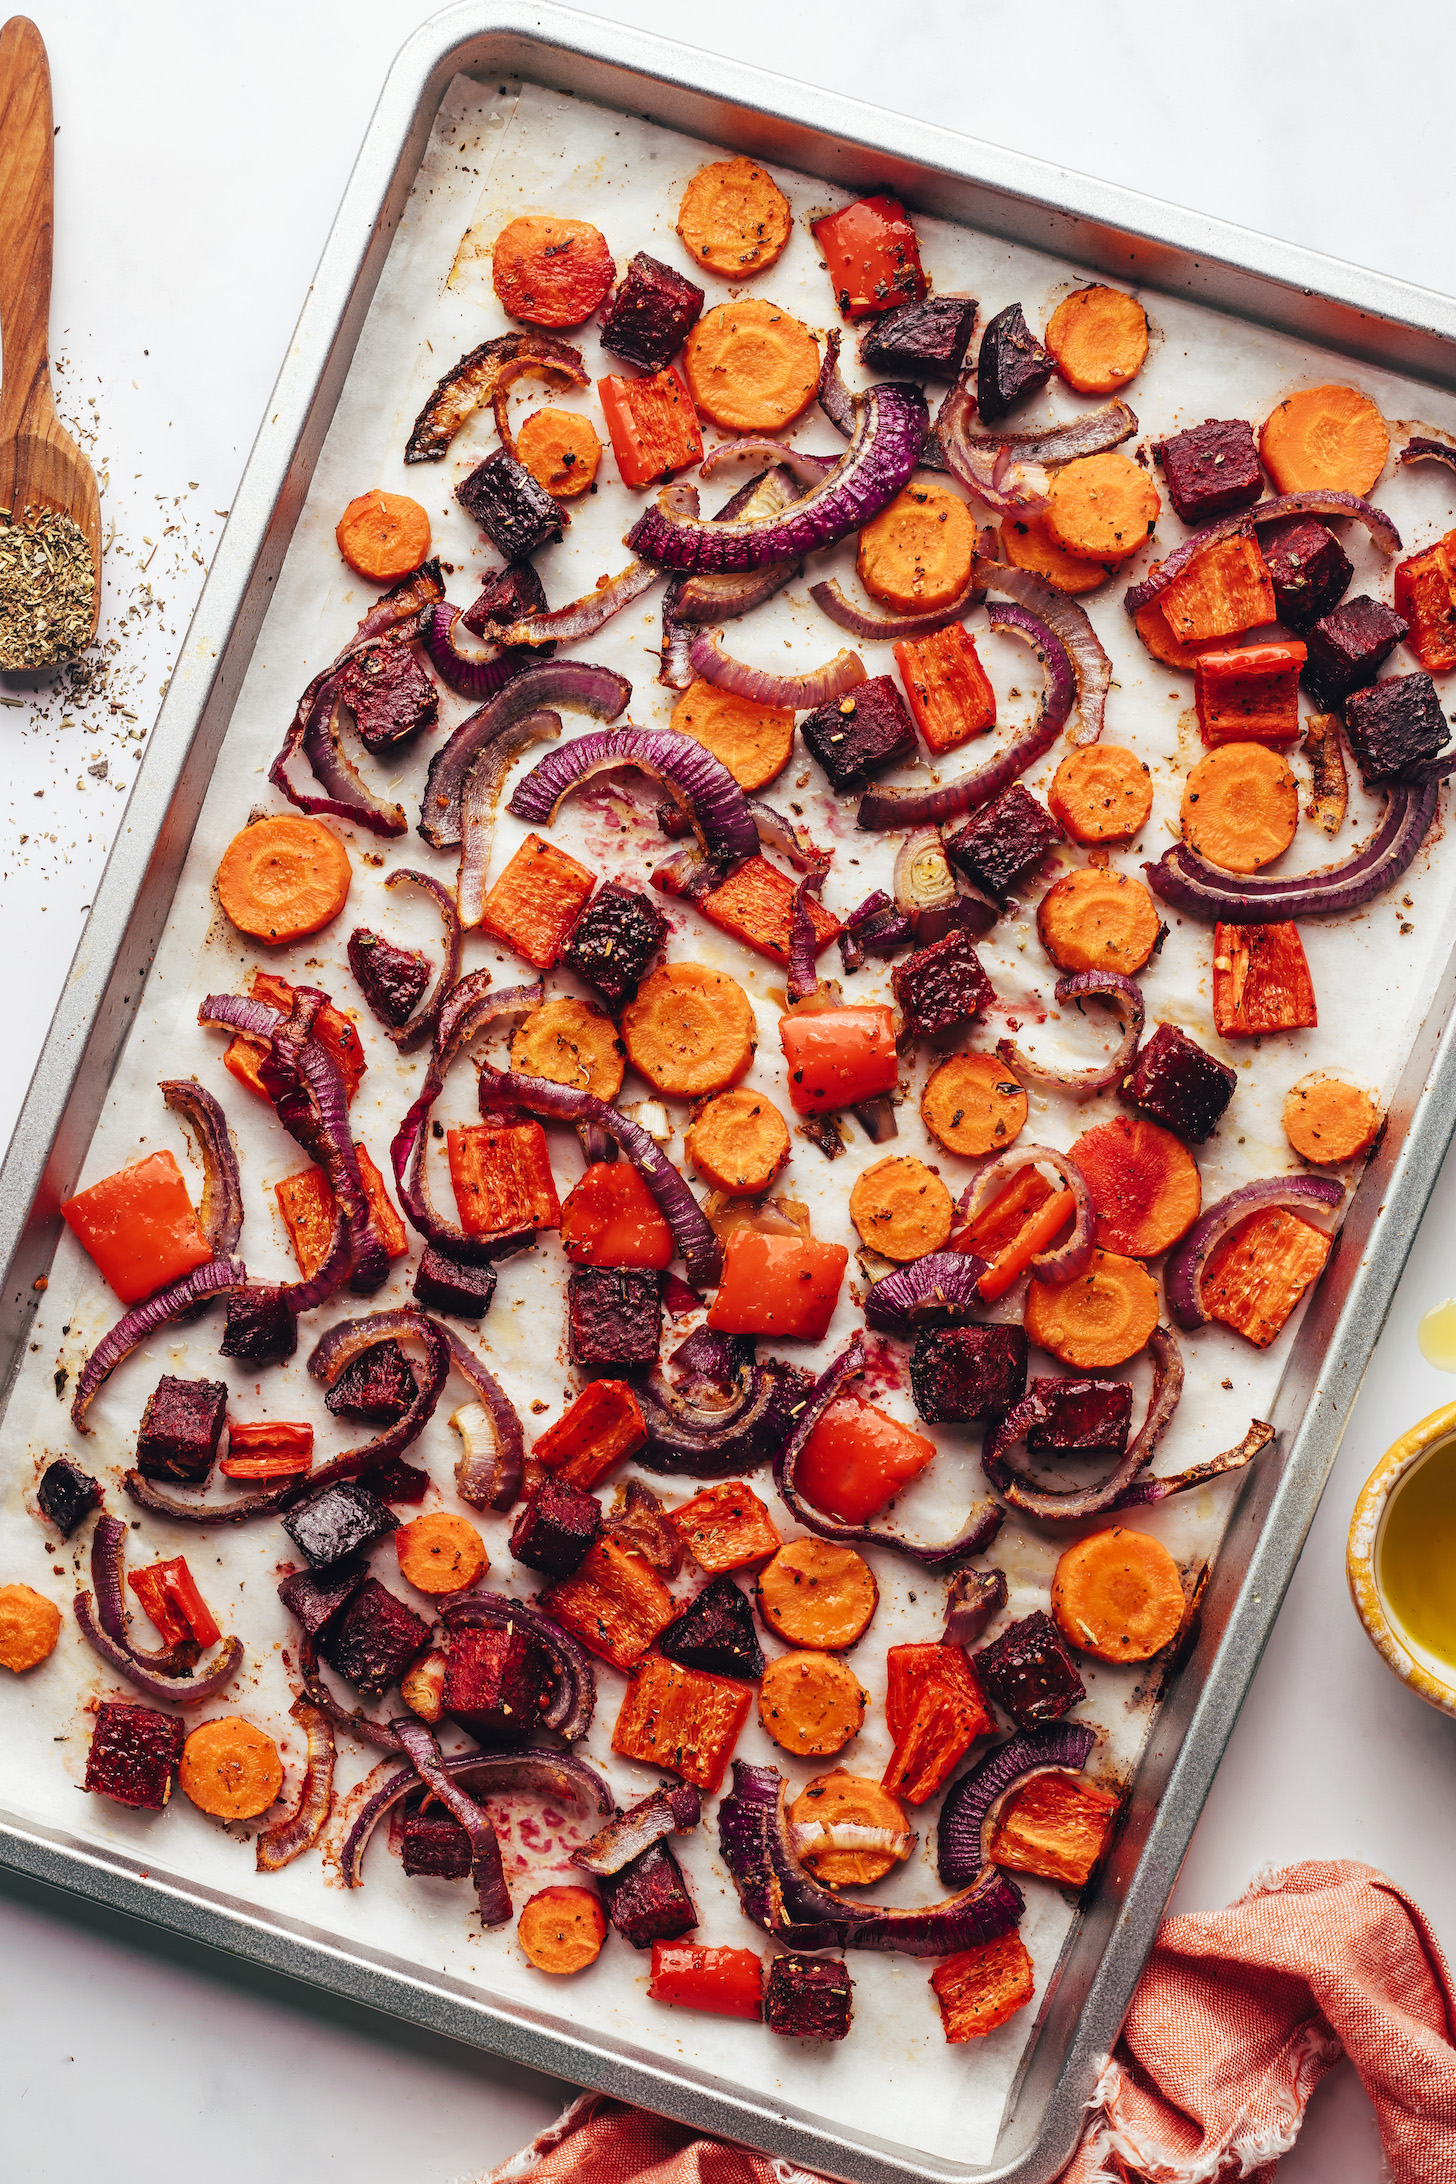 Roasted carrots, beets, red bell pepper, and red onion on a baking sheet